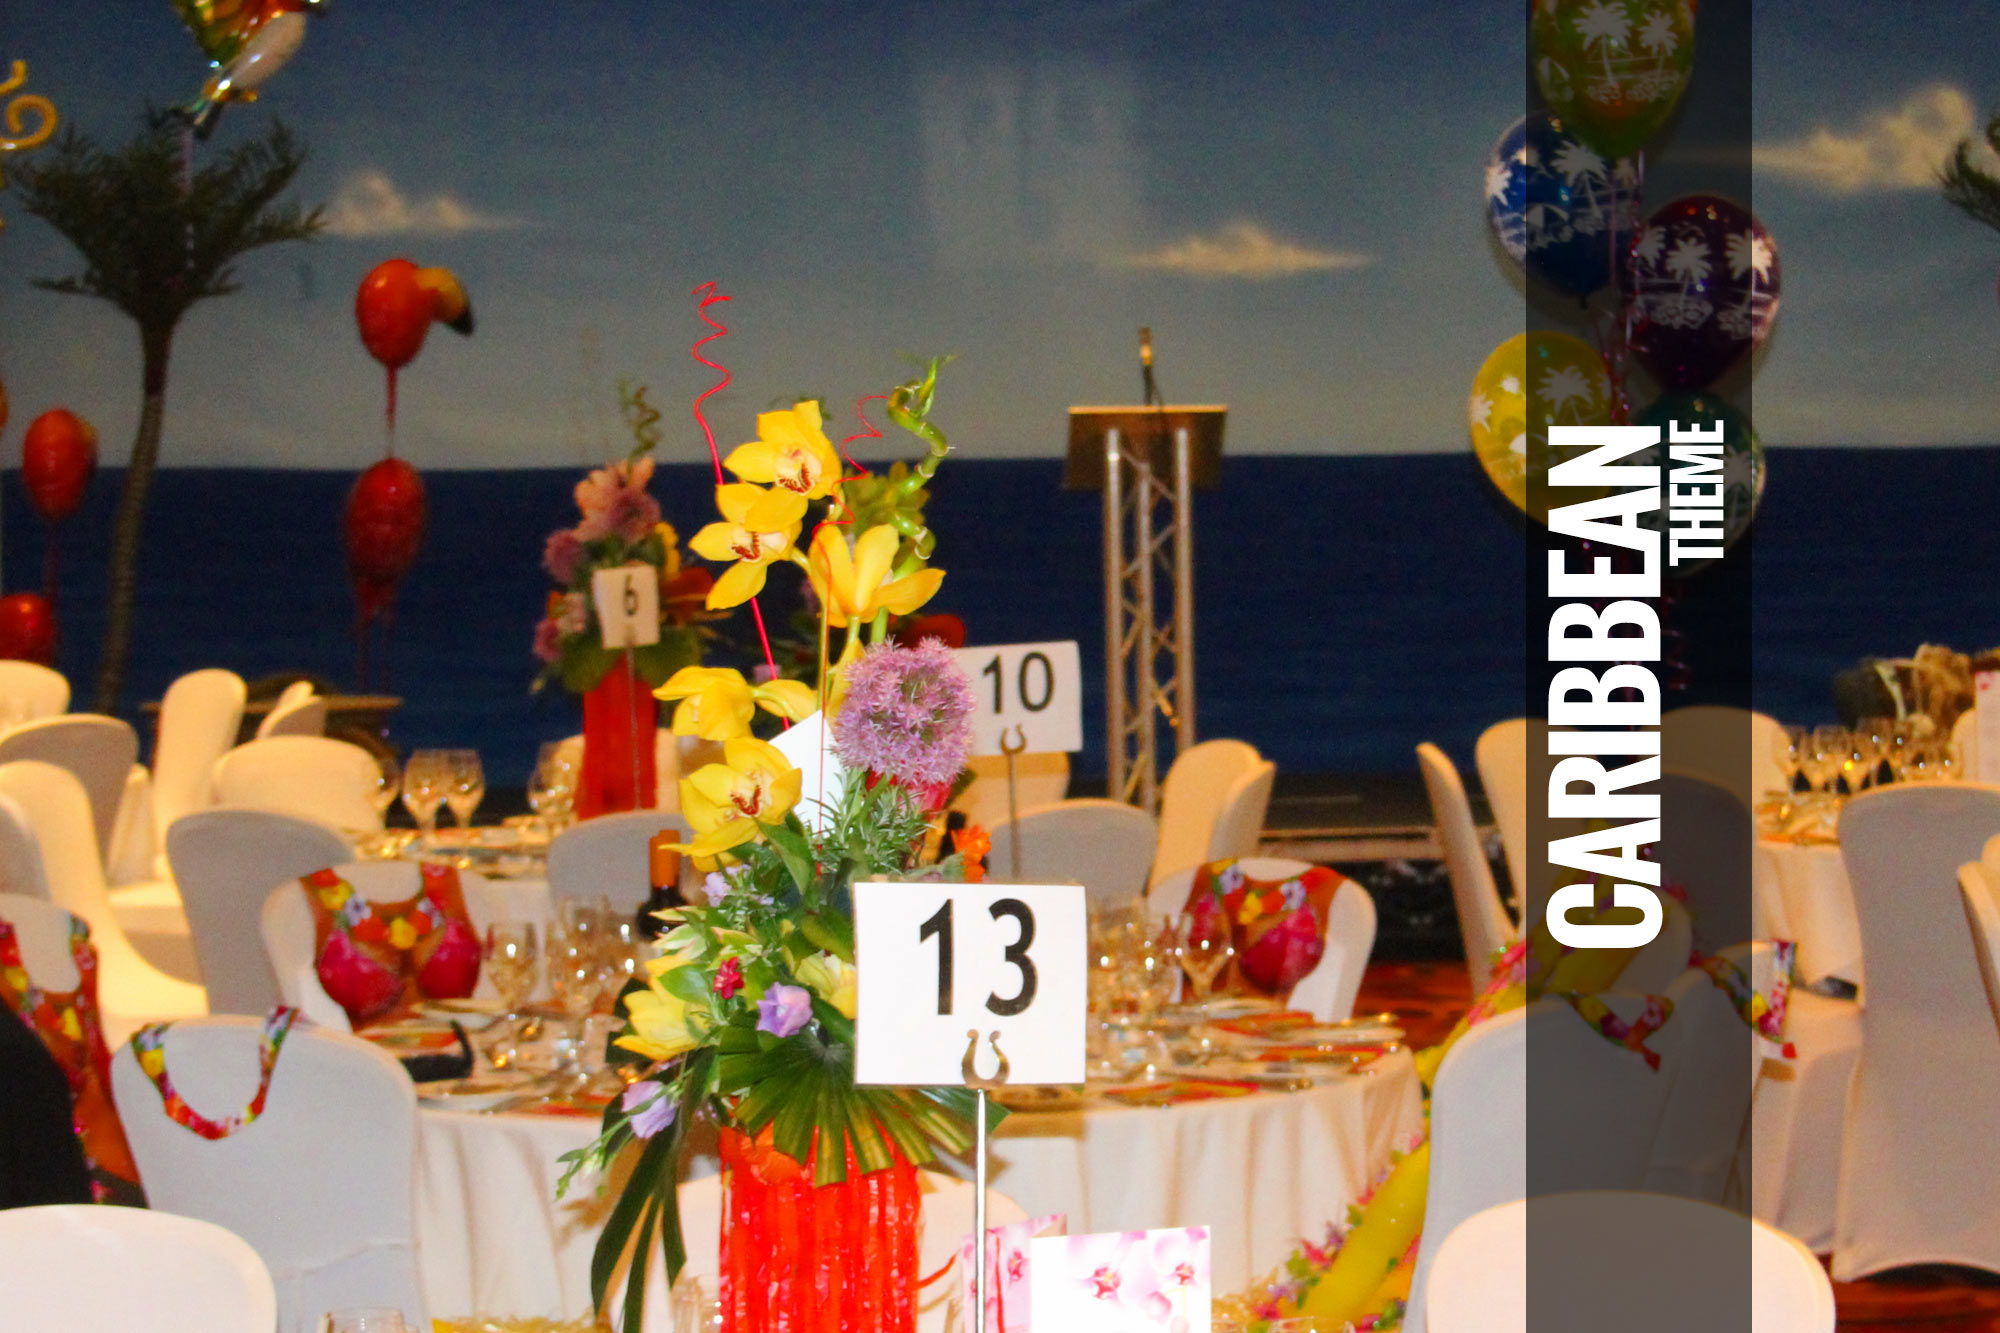 Caribbean Themed Events & Parties  Tropical Beach Party